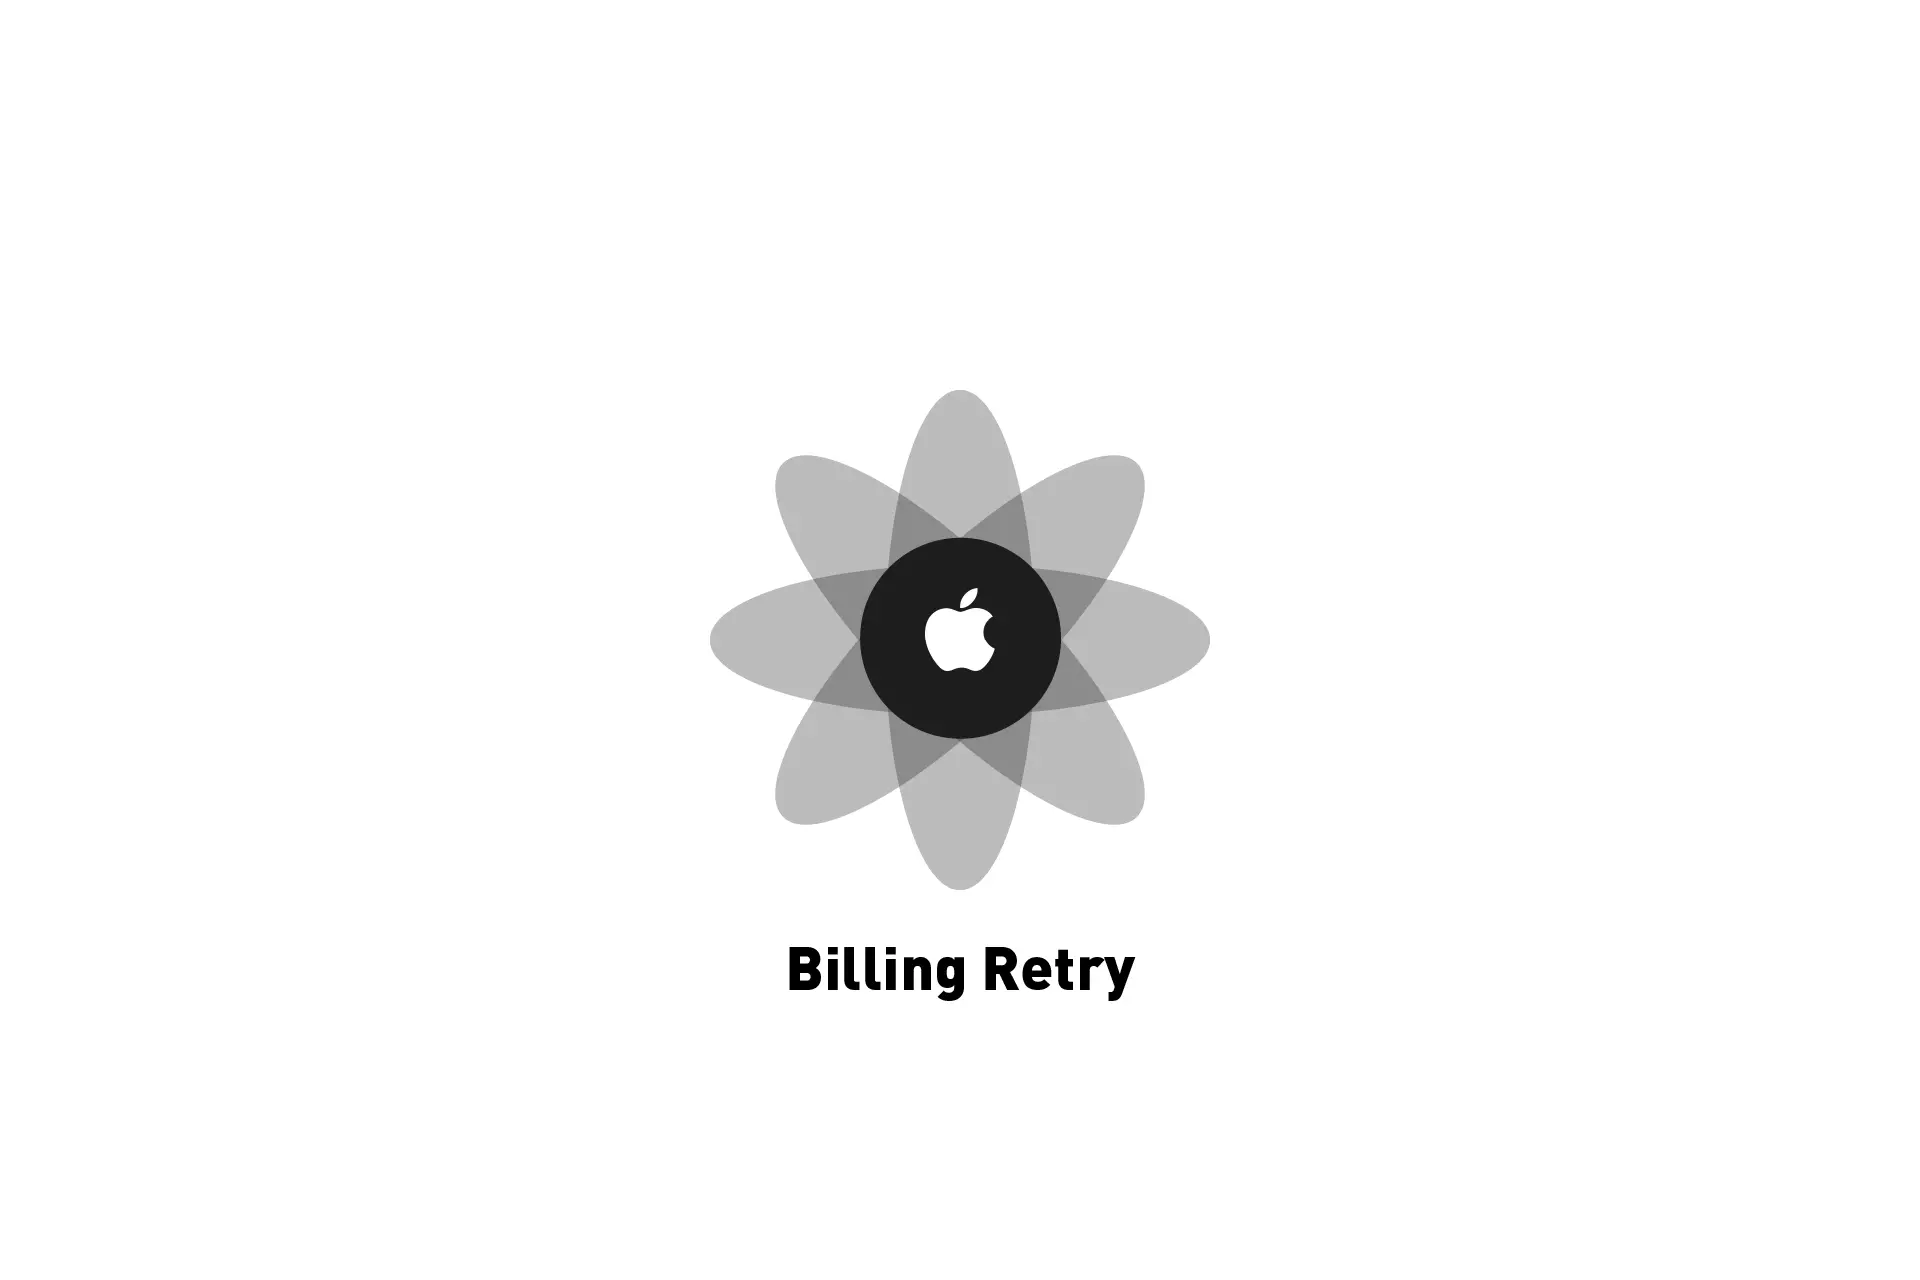 A flower that represents Apple with the text "Billing Retry" beneath it.